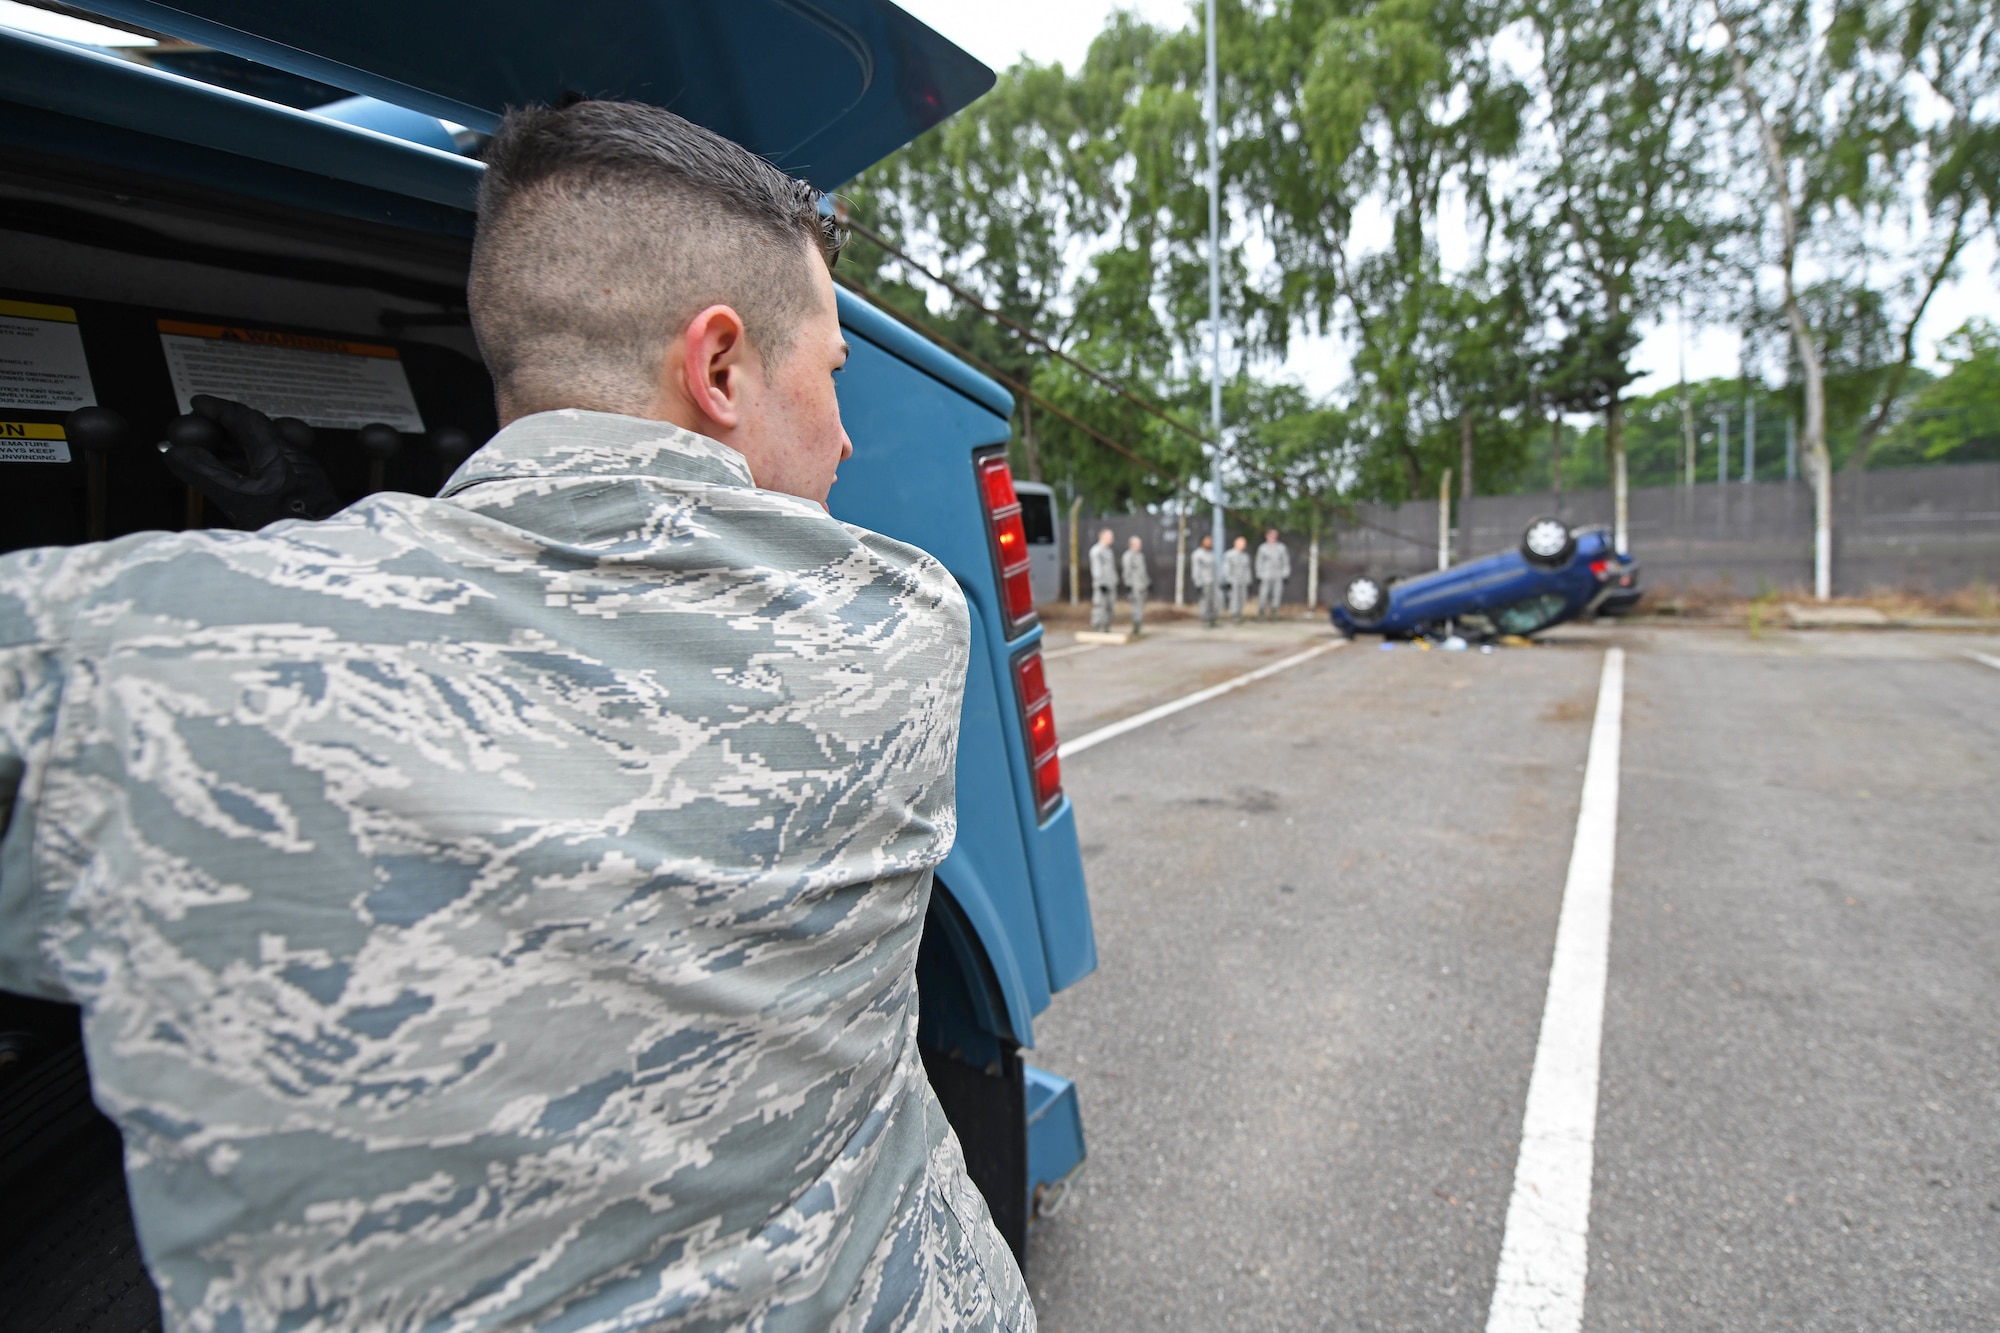 U.S. Air Force Airman 1st Class Louis Goscha, 48th Logistics Readiness Squadron ground transportation operator, flips a car using a tow truck during a Readiness Honed In Operations training day at RAF Lakenheath, England, July 13, 2019. The training was the first dual-wing RHINO training day for ground transportation Airmen that encompassed expeditionary, contingency and specialty skills training such as basic expeditionary airfield resources base setup, integrated defense and vehicle recovery. (U.S. Air Force photo by Senior Airman Luke Milano)